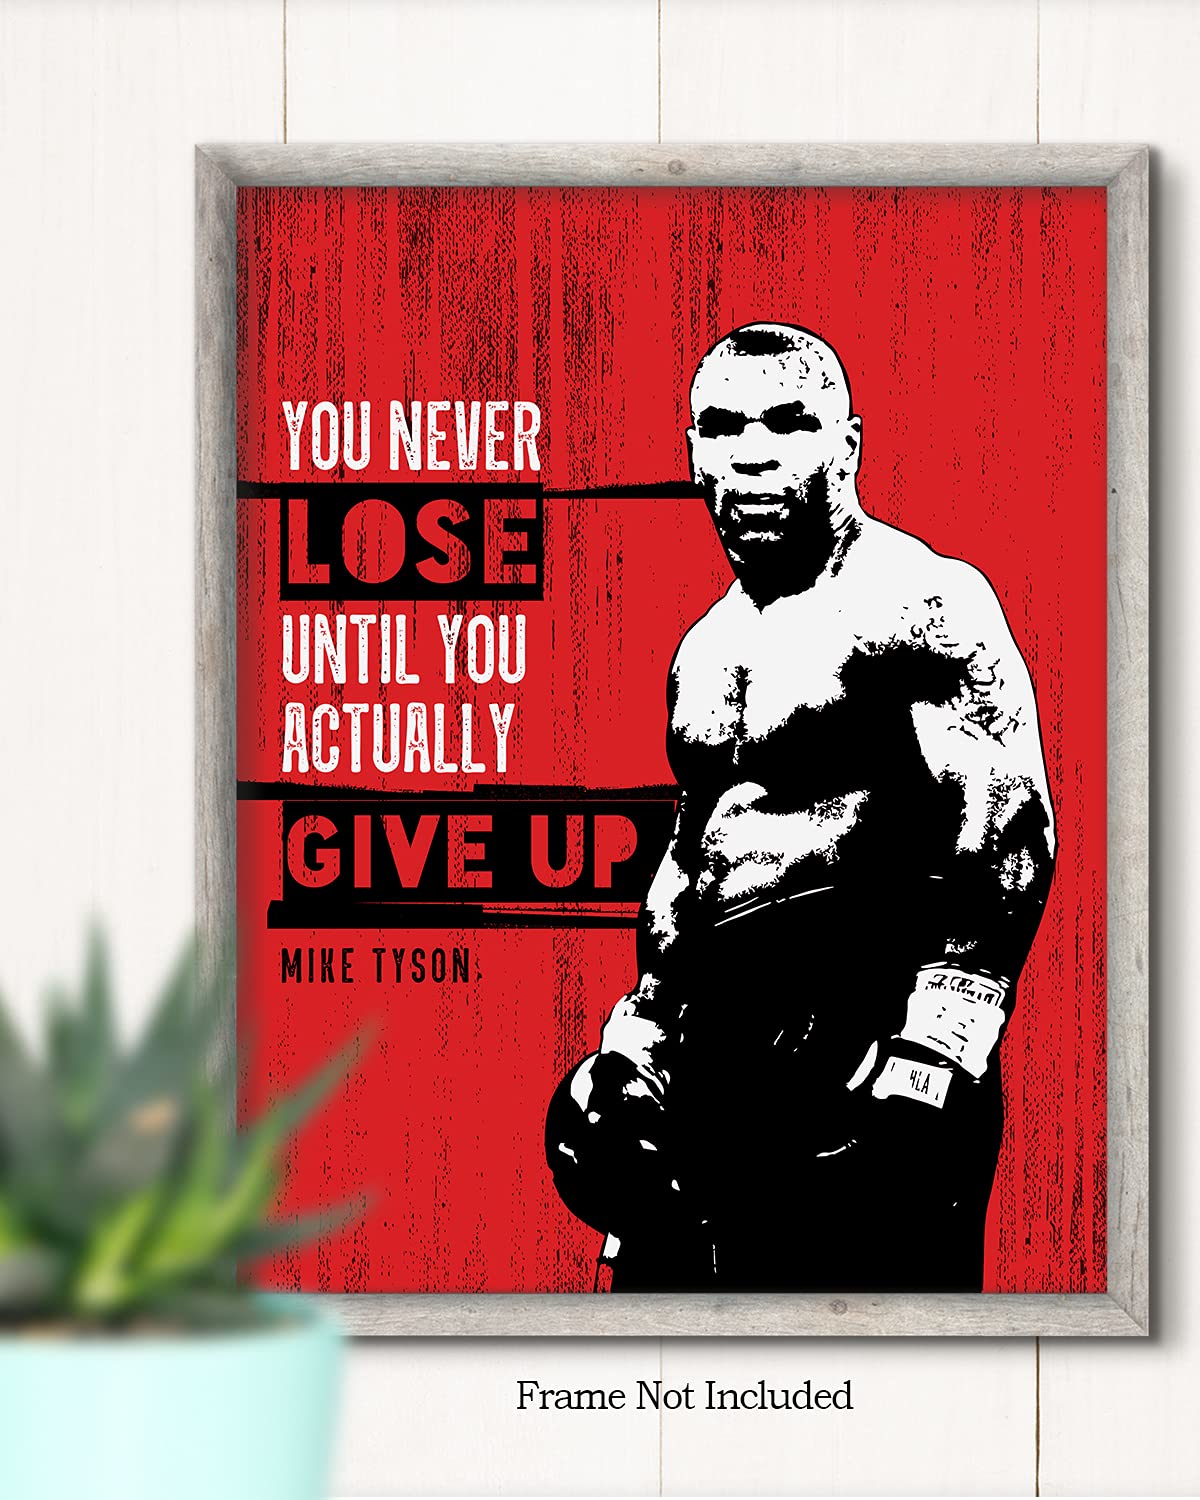 Motivational Sports Quotes - Boxing Poster, Print or Canvas - Mike Tyson Quote Wall Art - Great Gift for Boxers, Workout Enthusiasts & Weightlifters - 8x10 unframed print